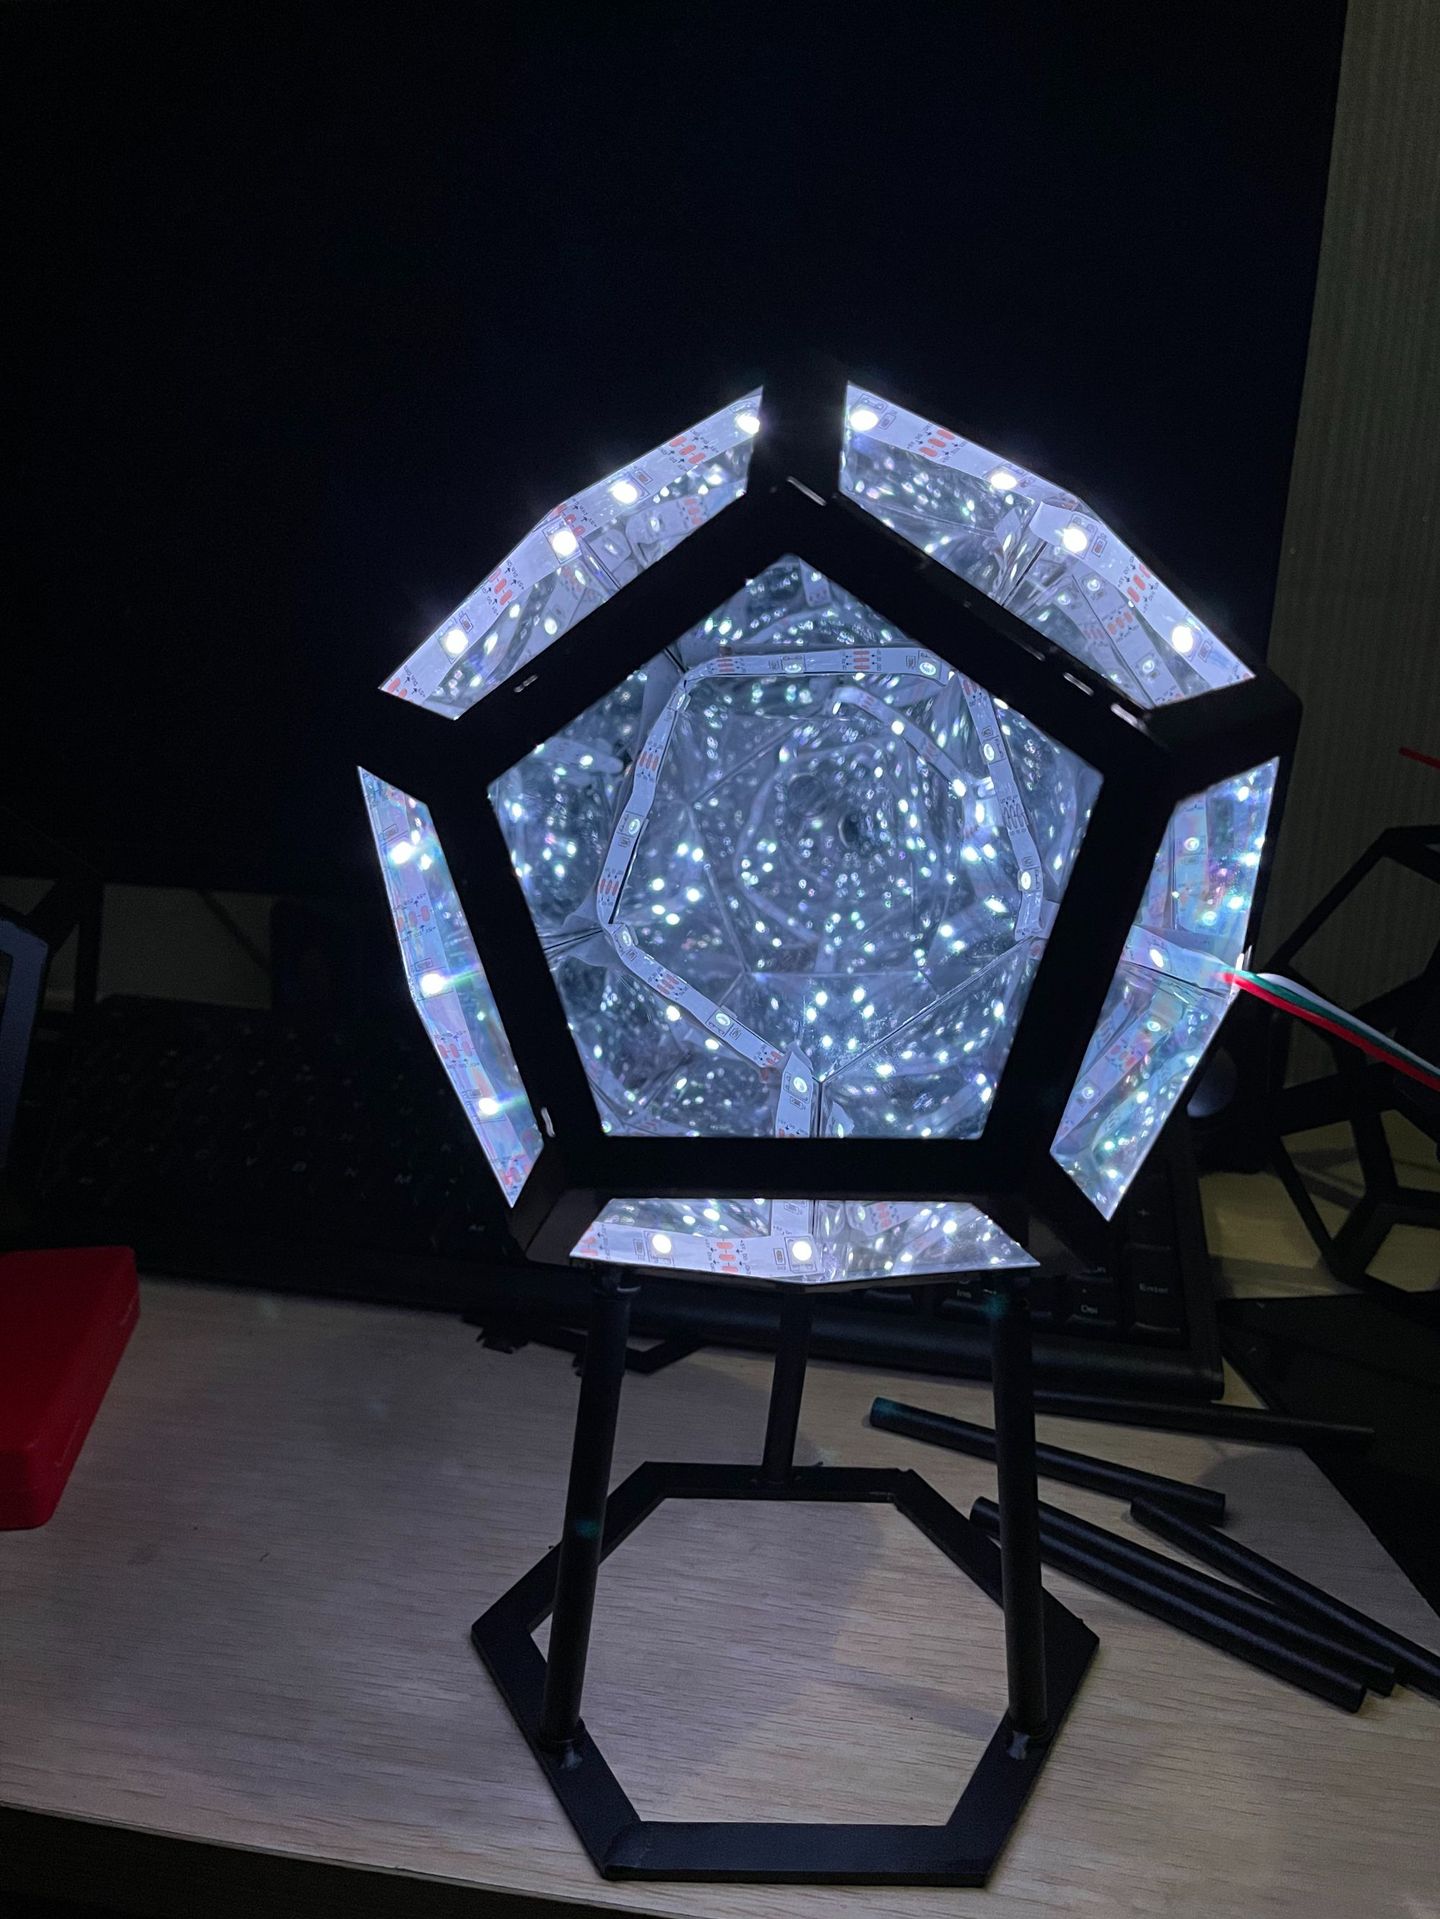 LED-Night-Light-Infinite-Dodecahedron-Color-Art-Light-Decor-Novelty-Christmas-Gift-Cool-Technology-D-1892830-4